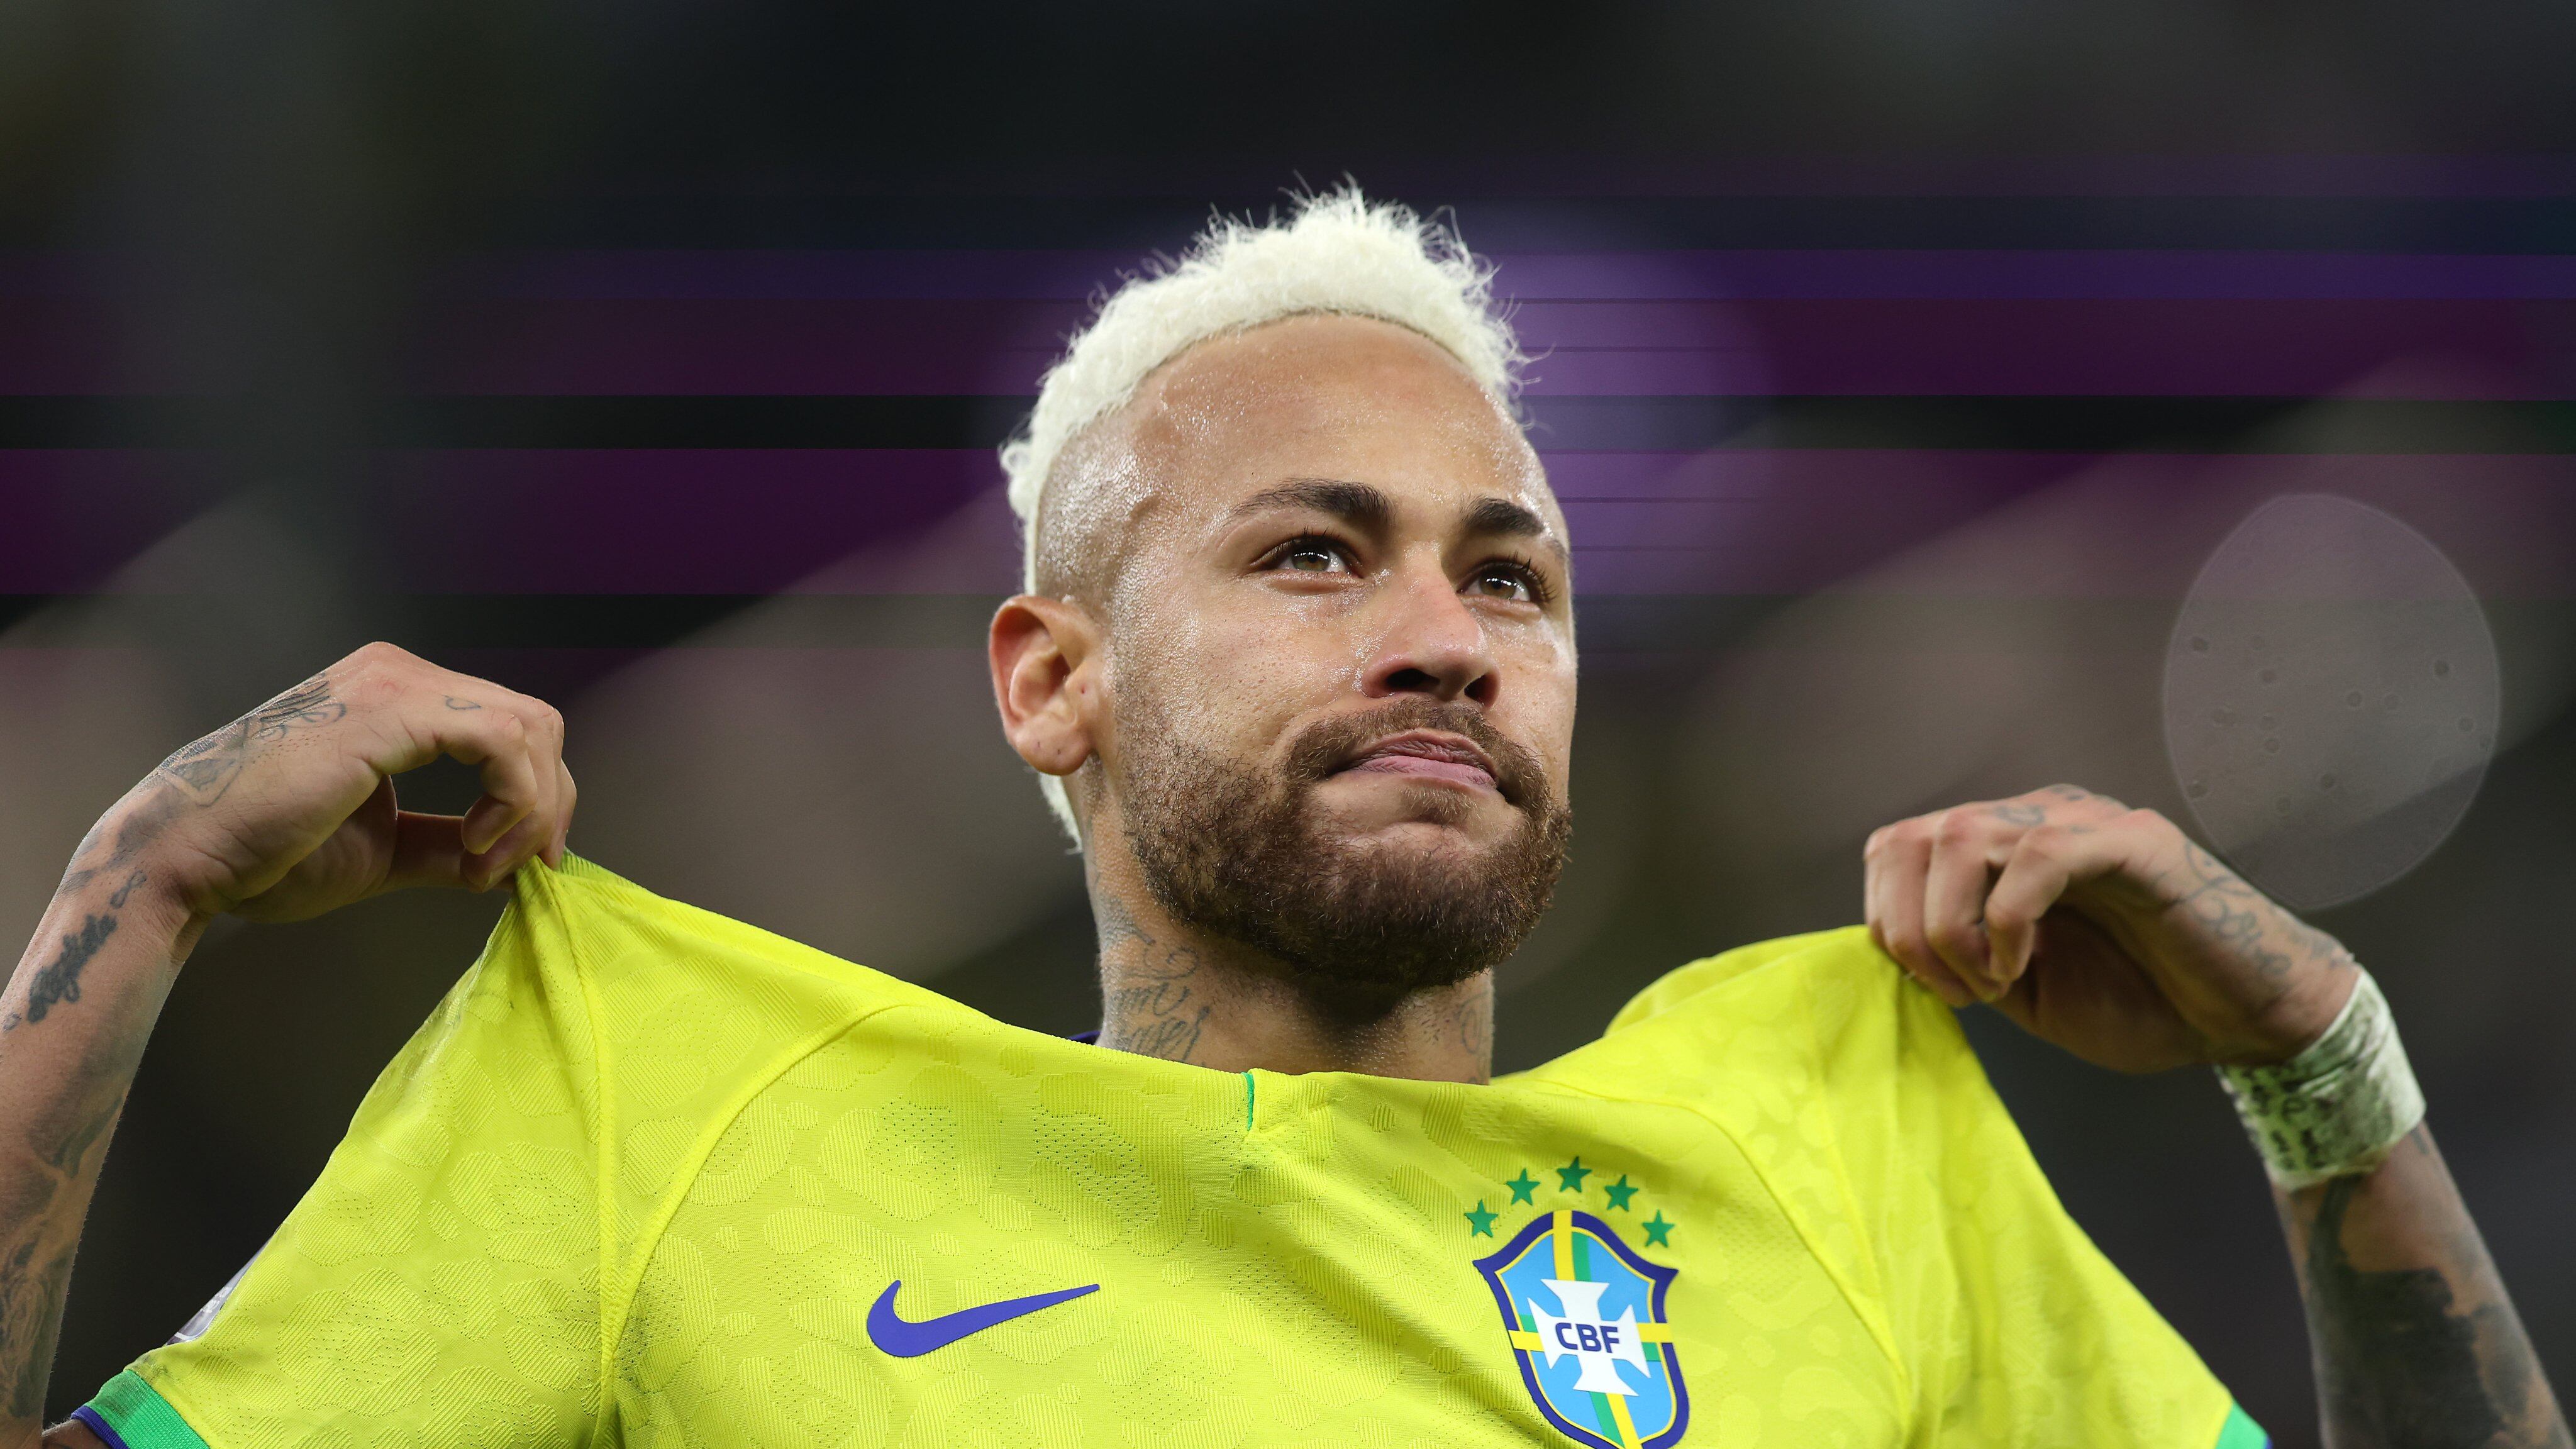 The player that Neymar placed in the Brazilian team over Tite, ruined the World Cup